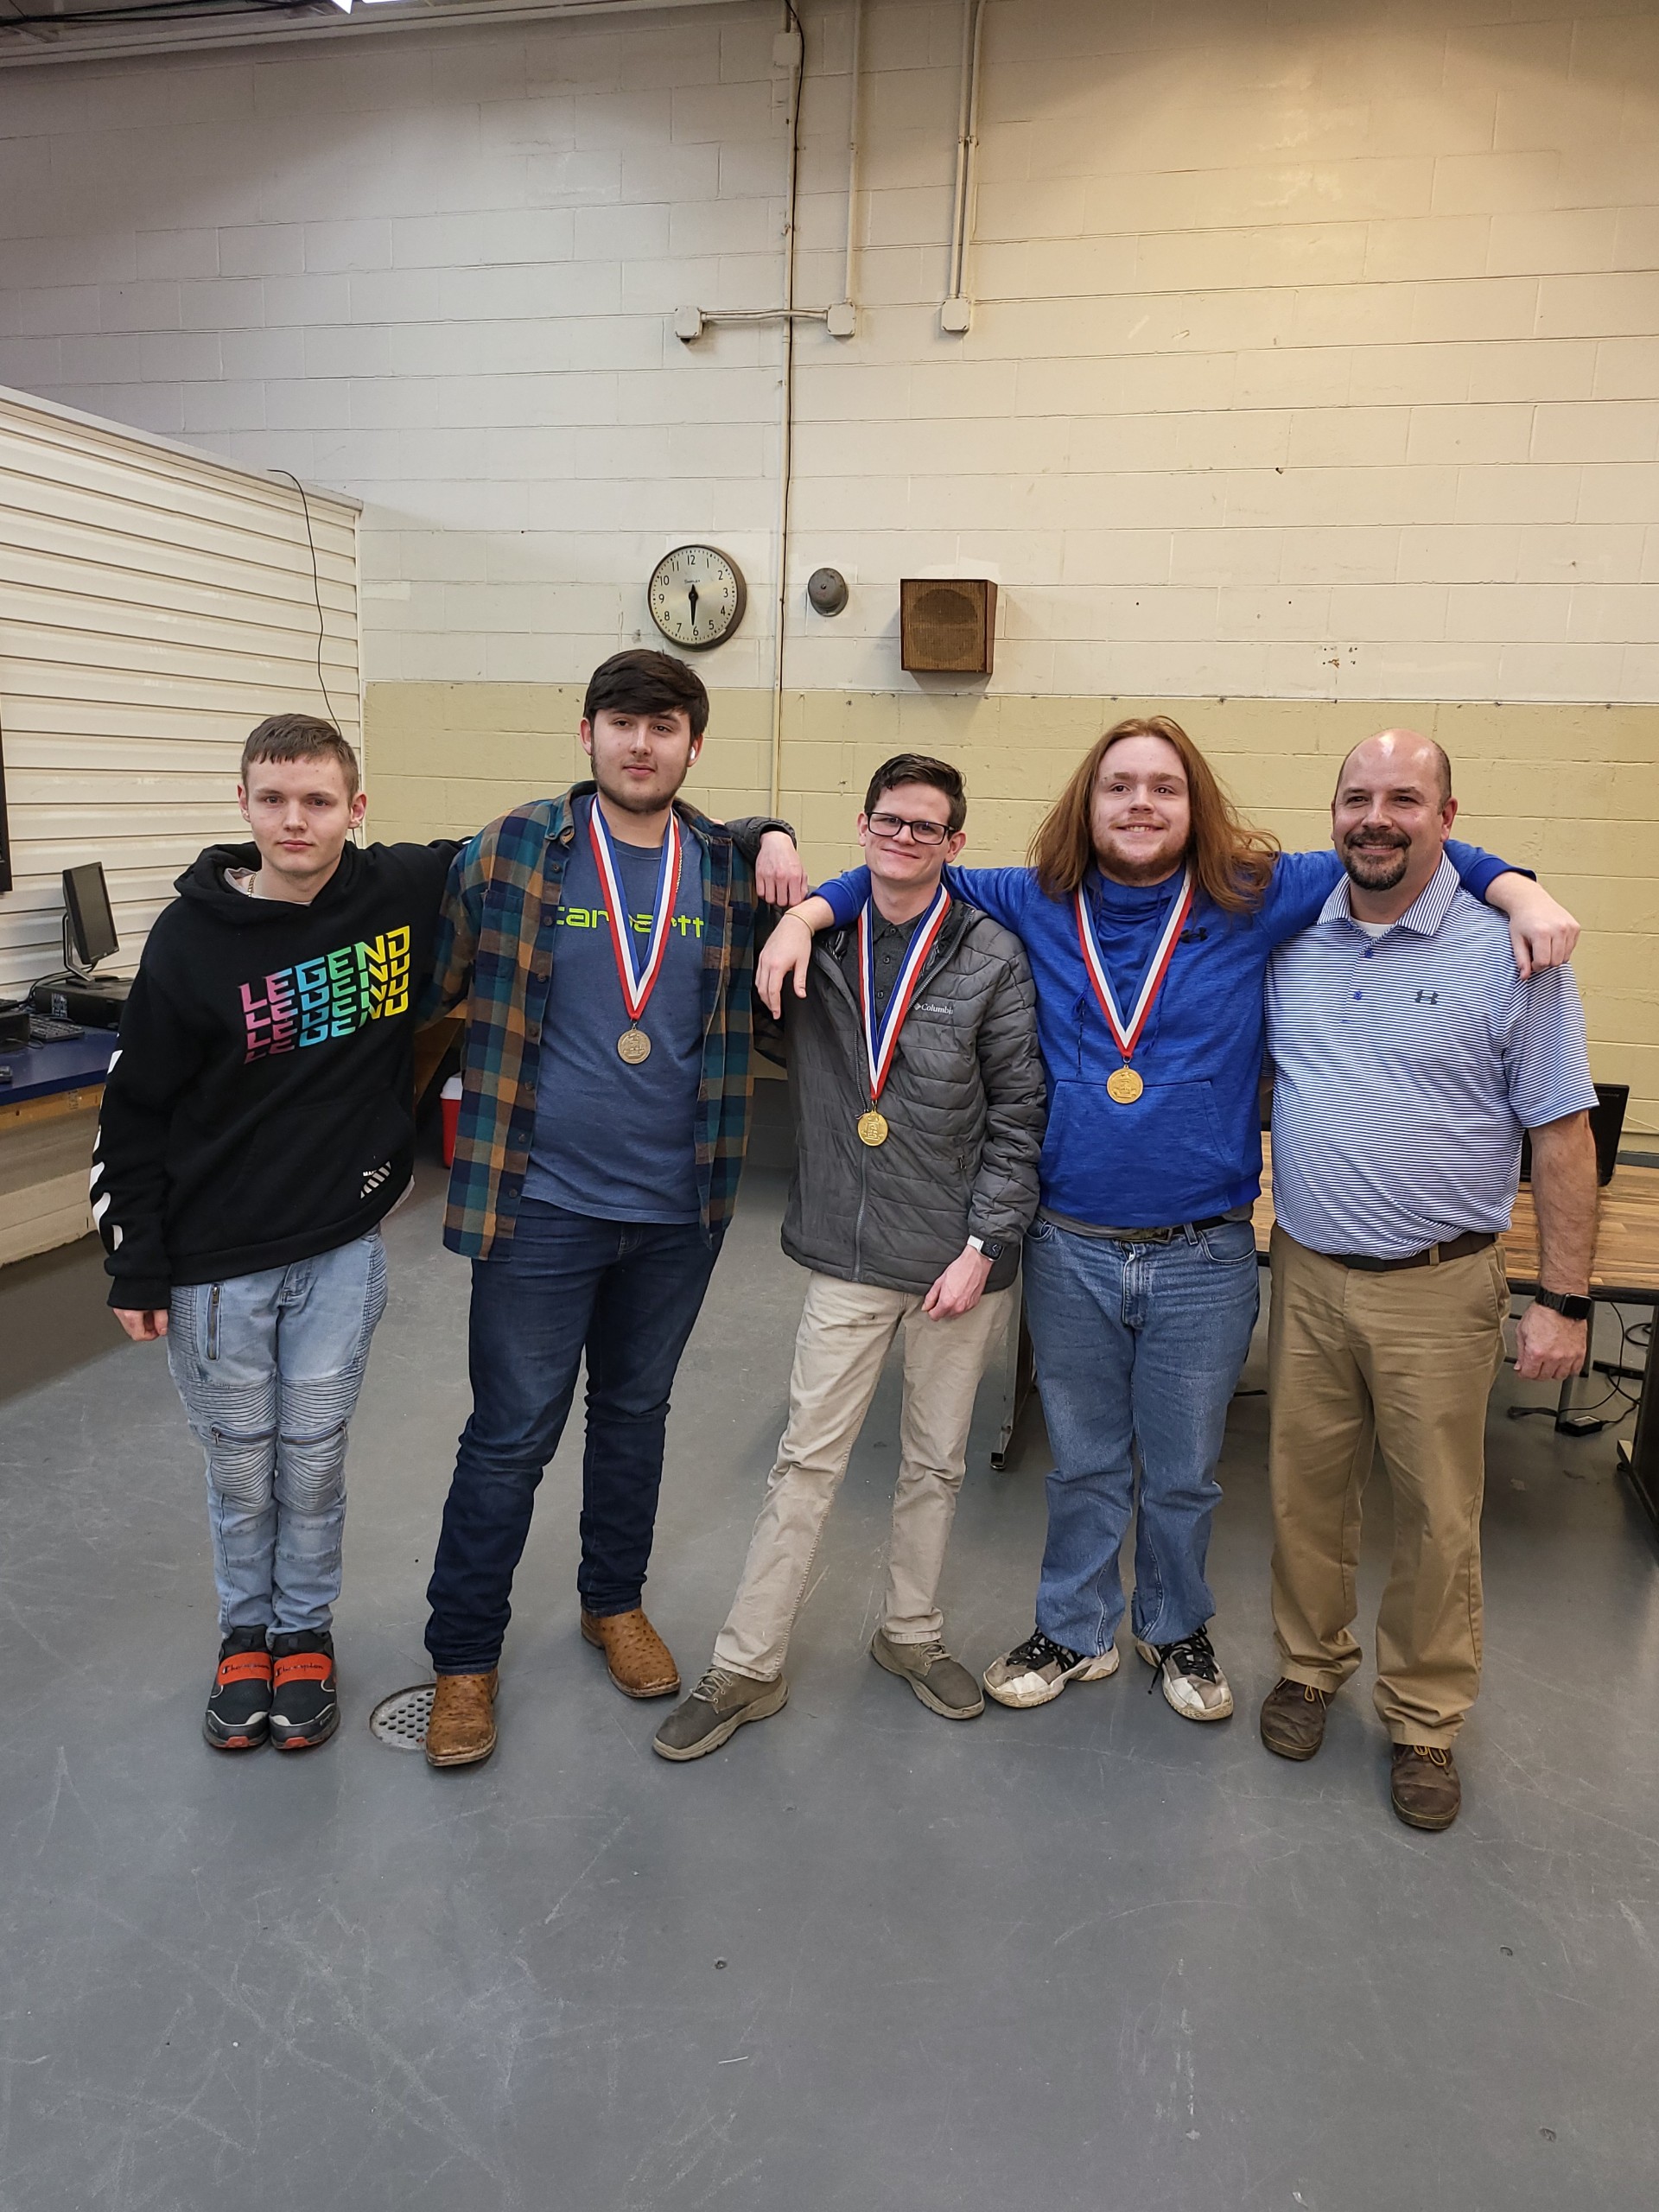 Jack Jordan, center, is shown with participants in SkillsUSA at Clay County Area Technology Center.